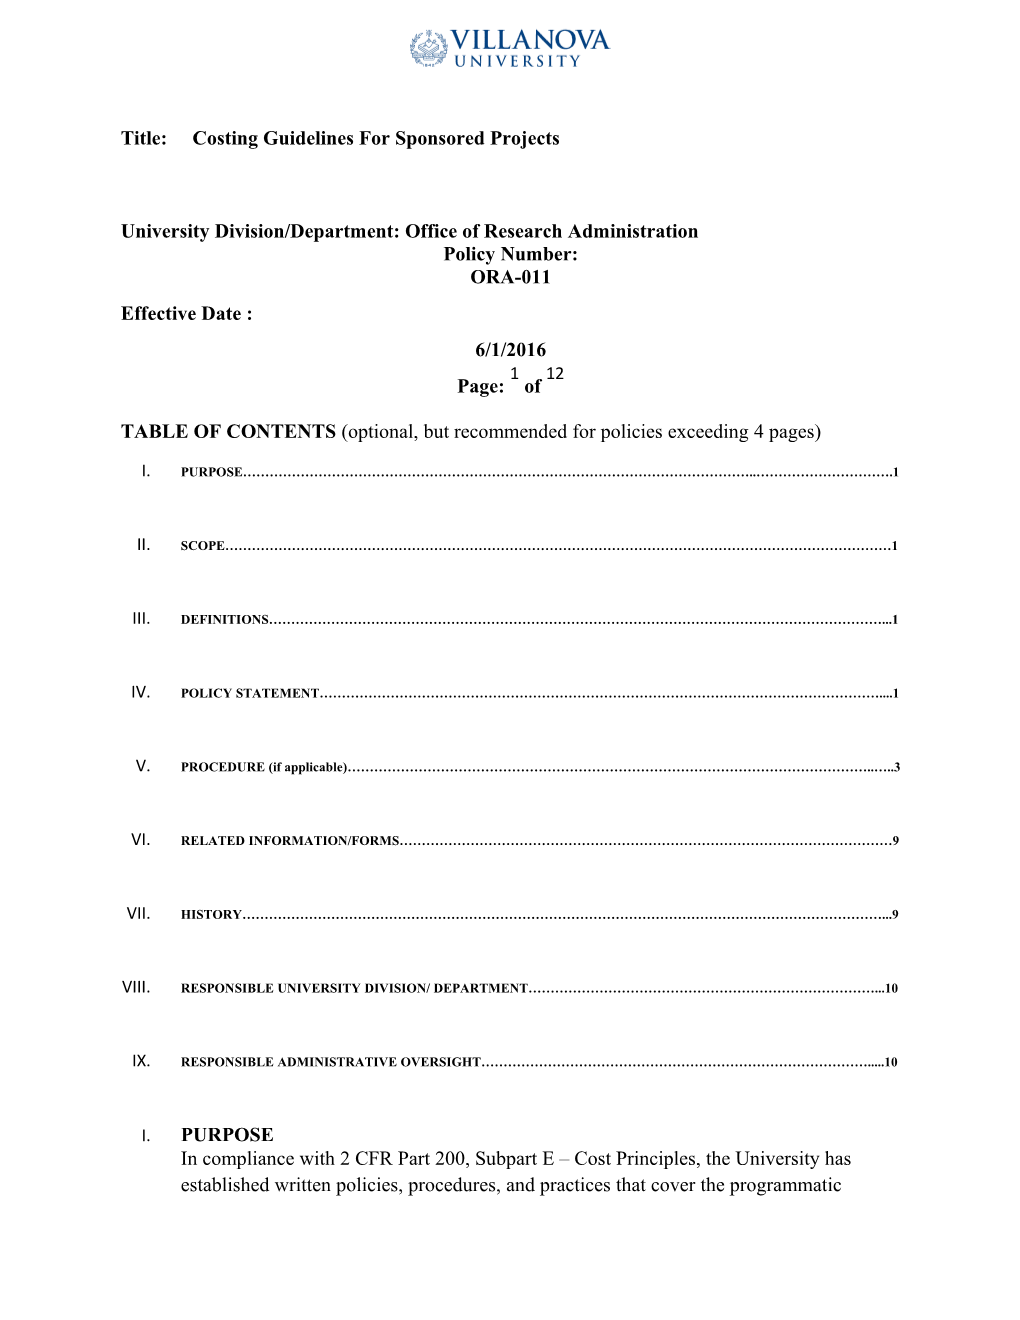 TABLE of CONTENTS (Optional, but Recommended for Policies Exceeding 4Pages)